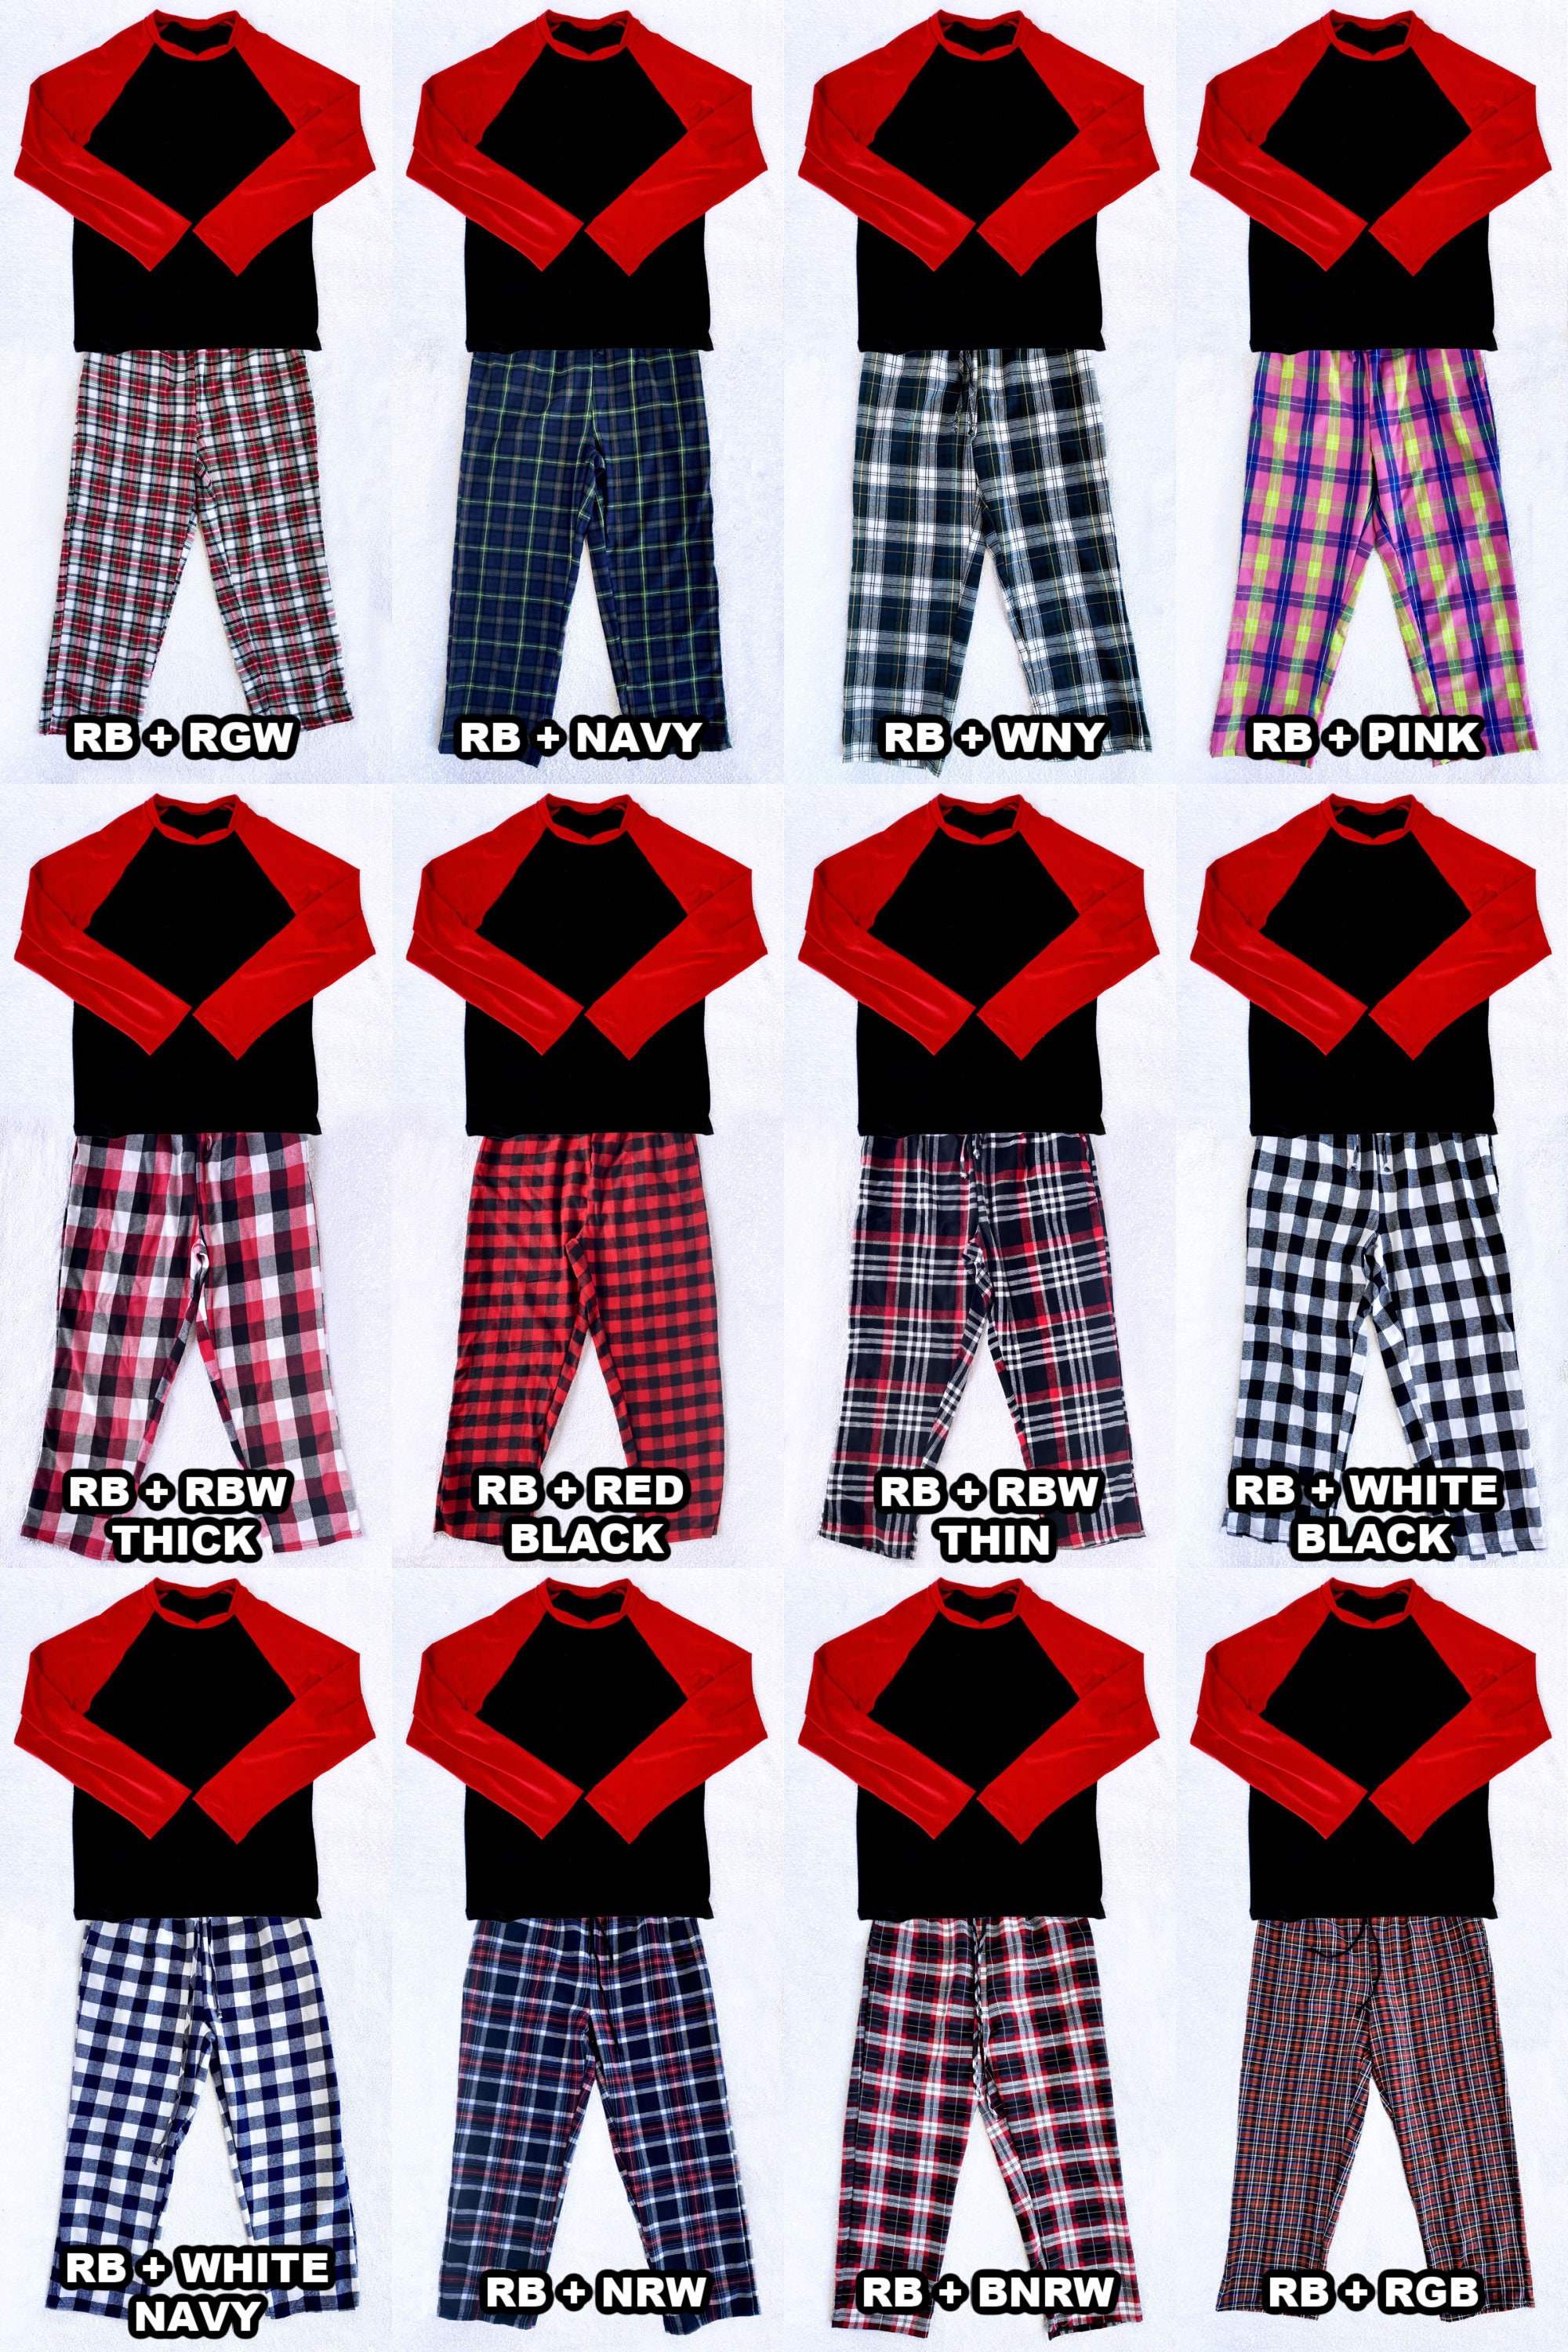 Red And Black Pj Pants Kids Cheapest Selection